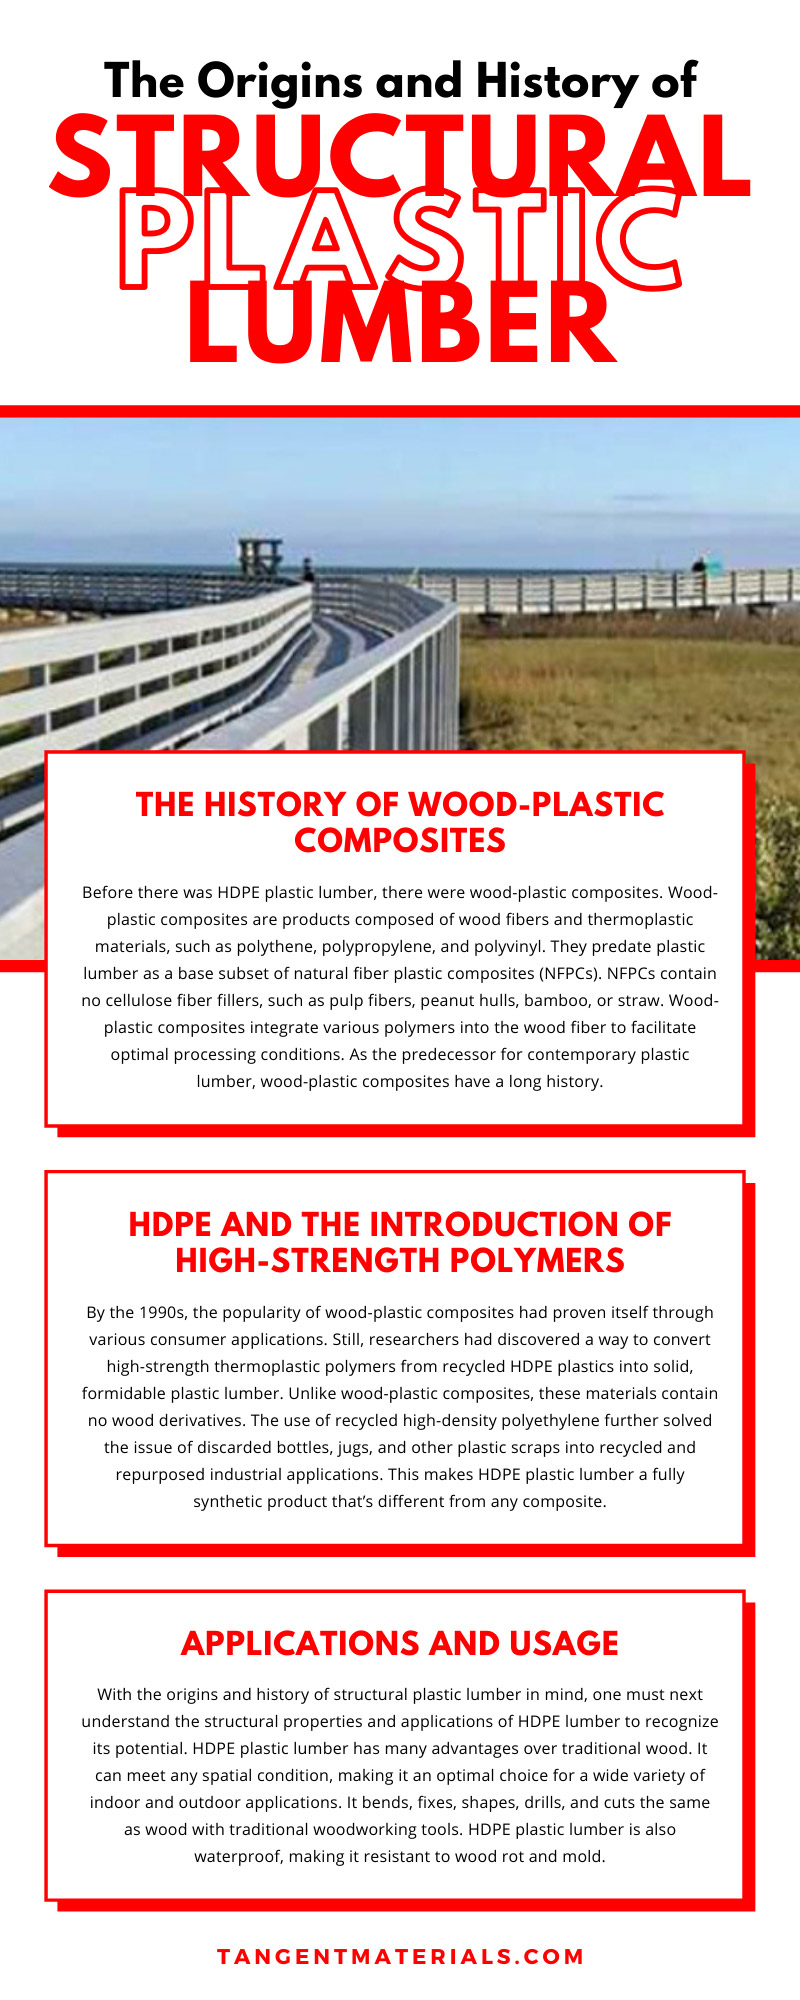 The Origins and History of Structural Plastic Lumber